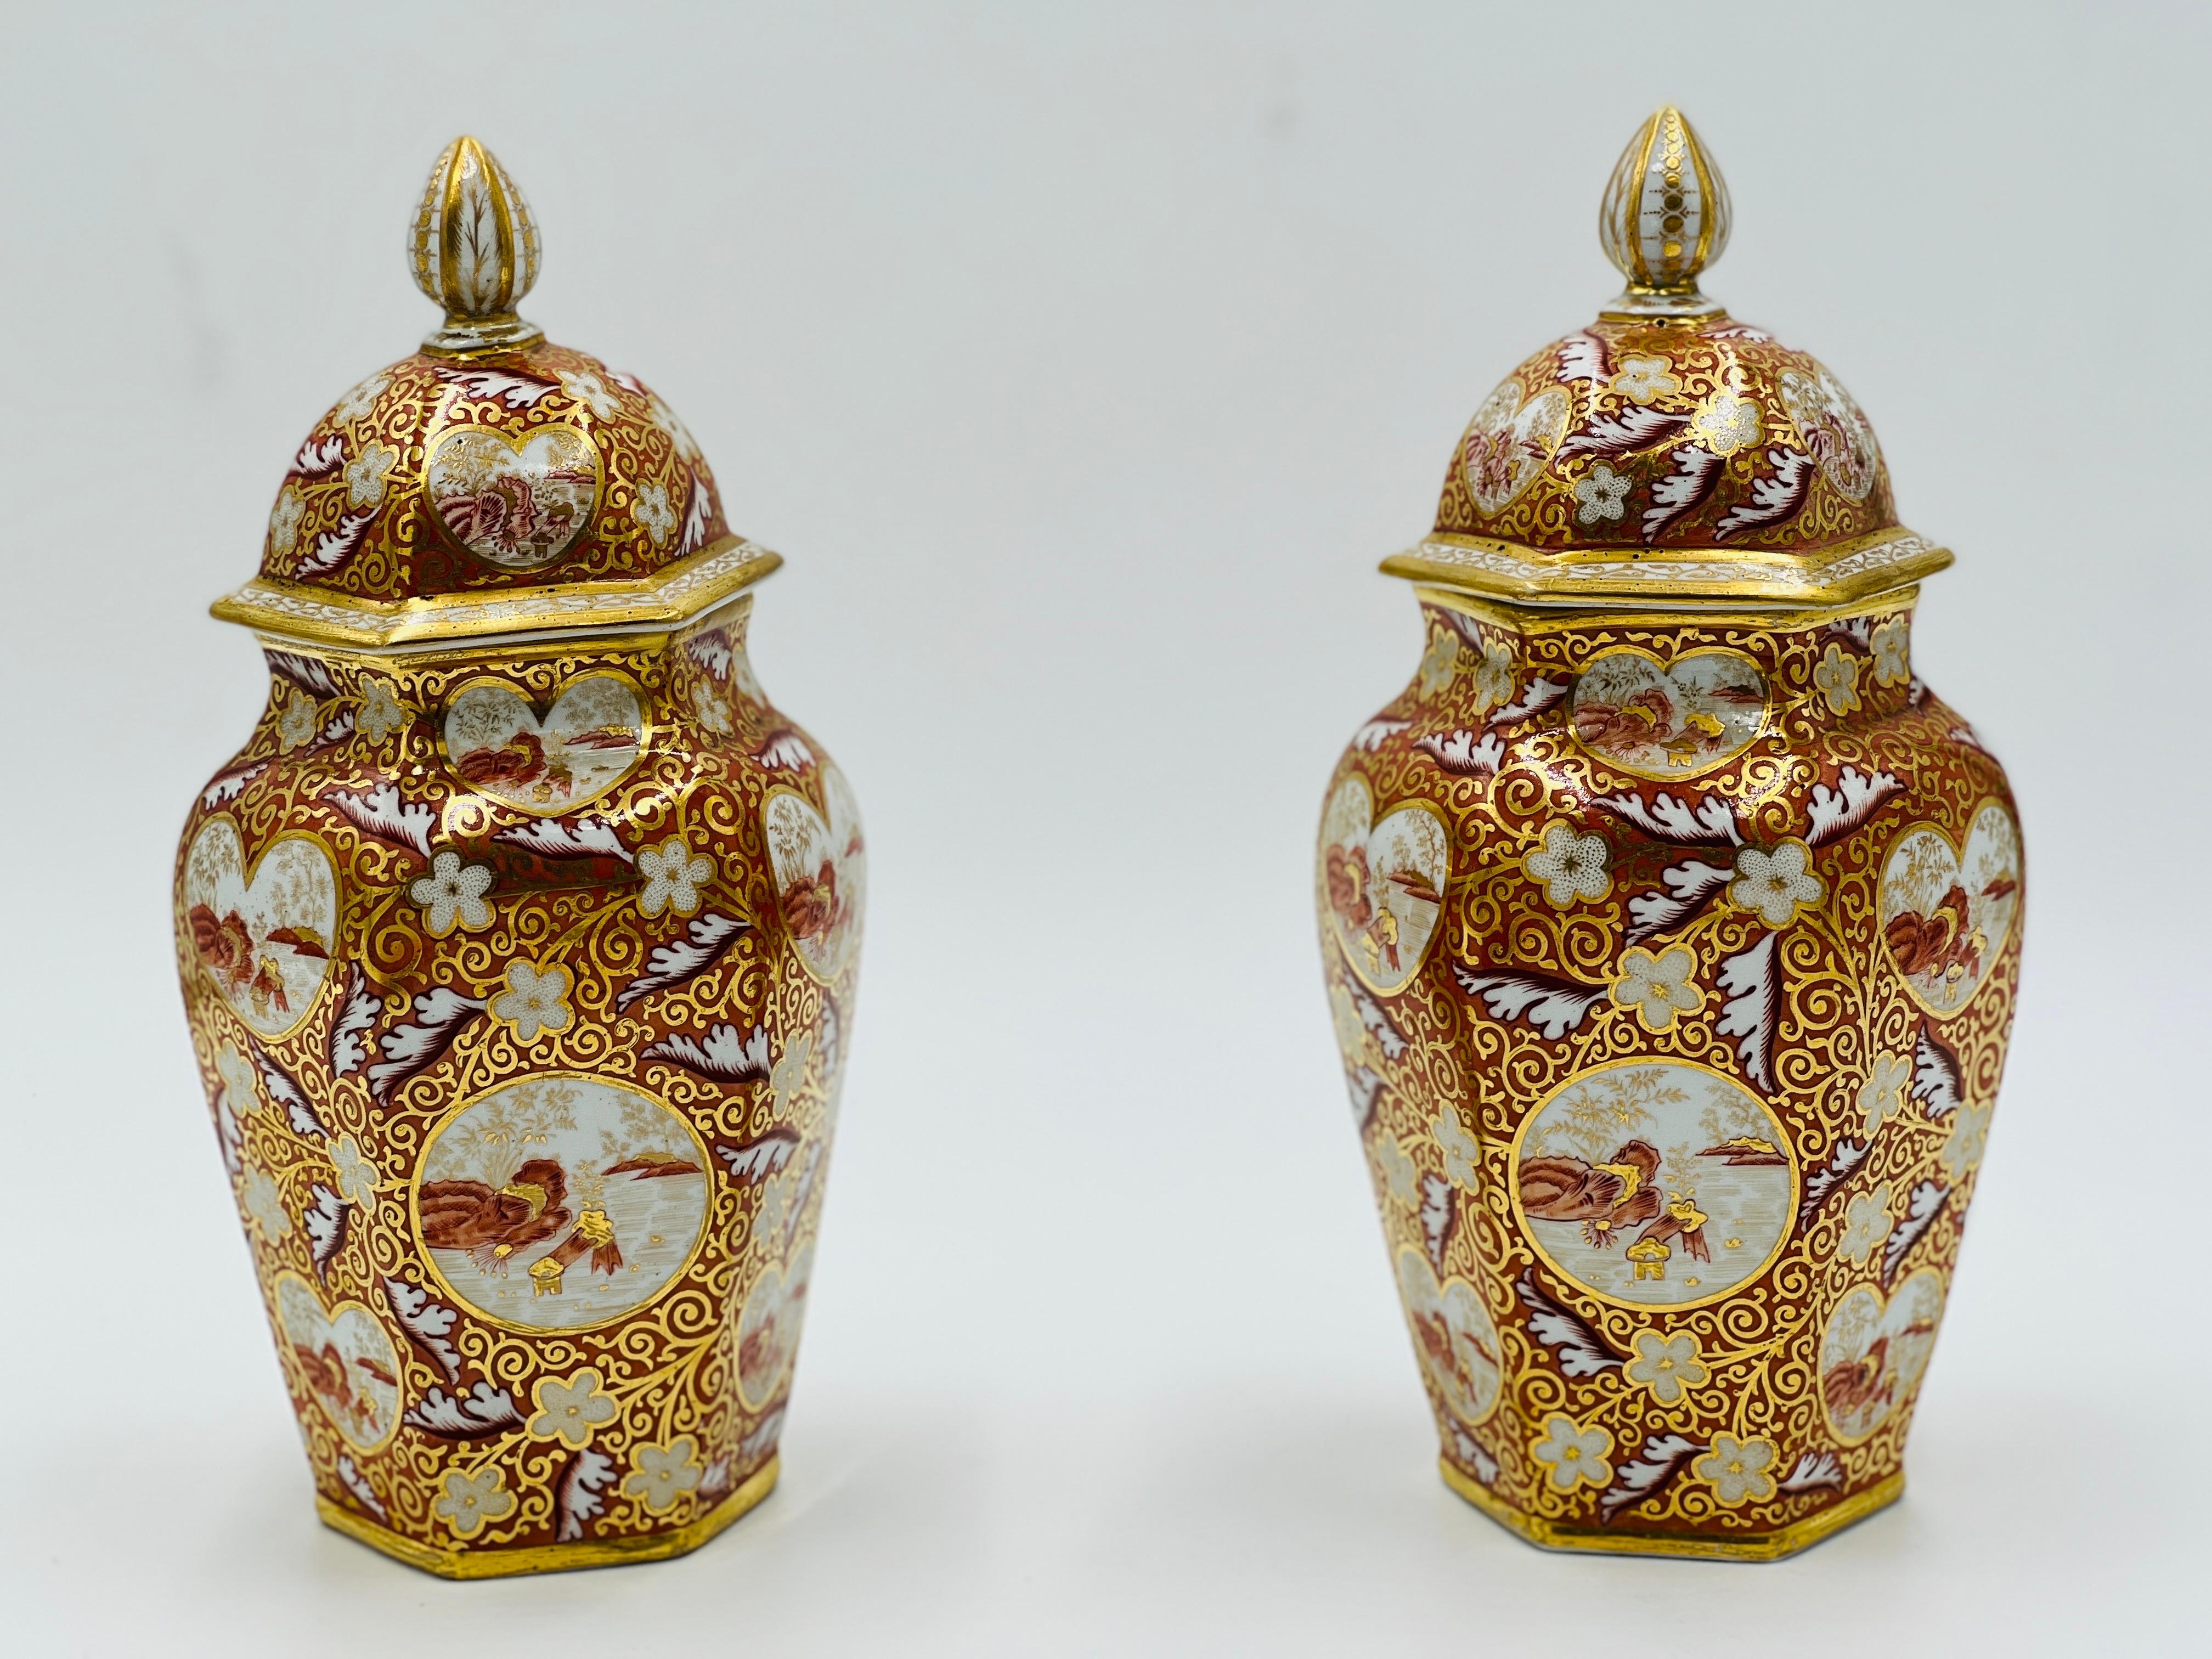 Pair, 19th Century English Japonesque Porcelain Lidded Urns EXC 10.25”.

A pair of absolutely exceptional English porcelain lidded urns in an unidentified pattern. Possibly Coalport or Chamberlain Worcester.

10.25” h x 5.25” w

No significant